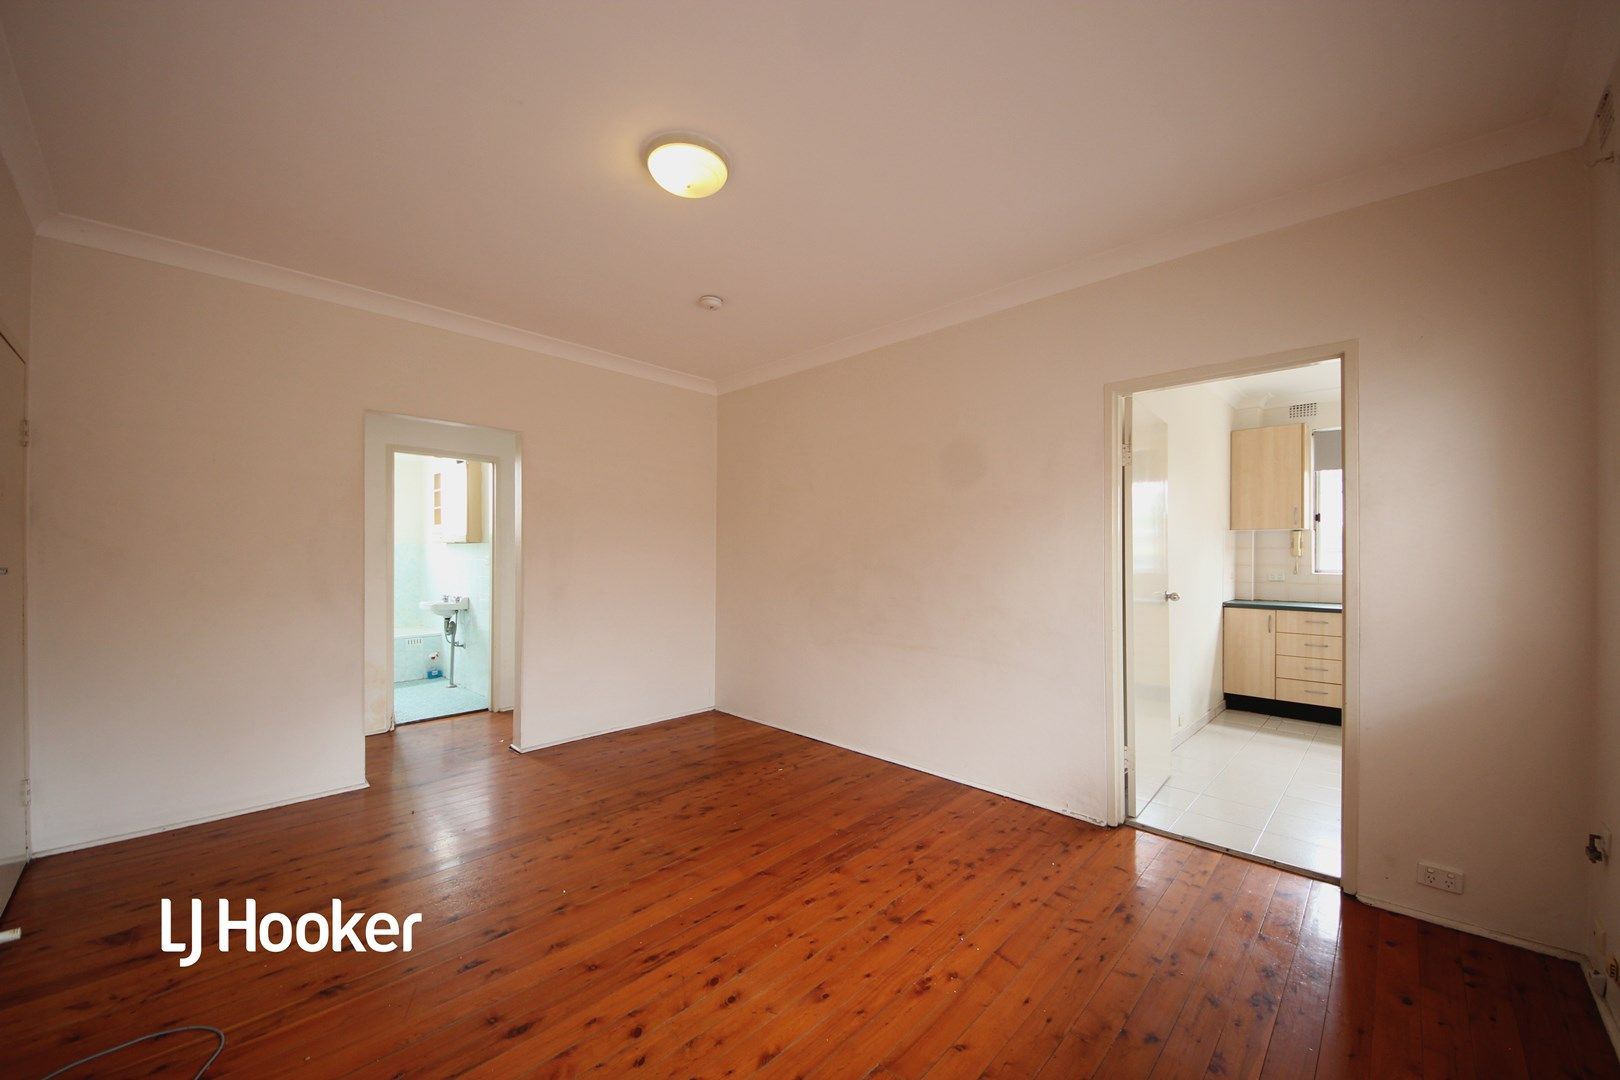 3 bedrooms Apartment / Unit / Flat in 3/15 Clyde Street CROYDON PARK NSW, 2133